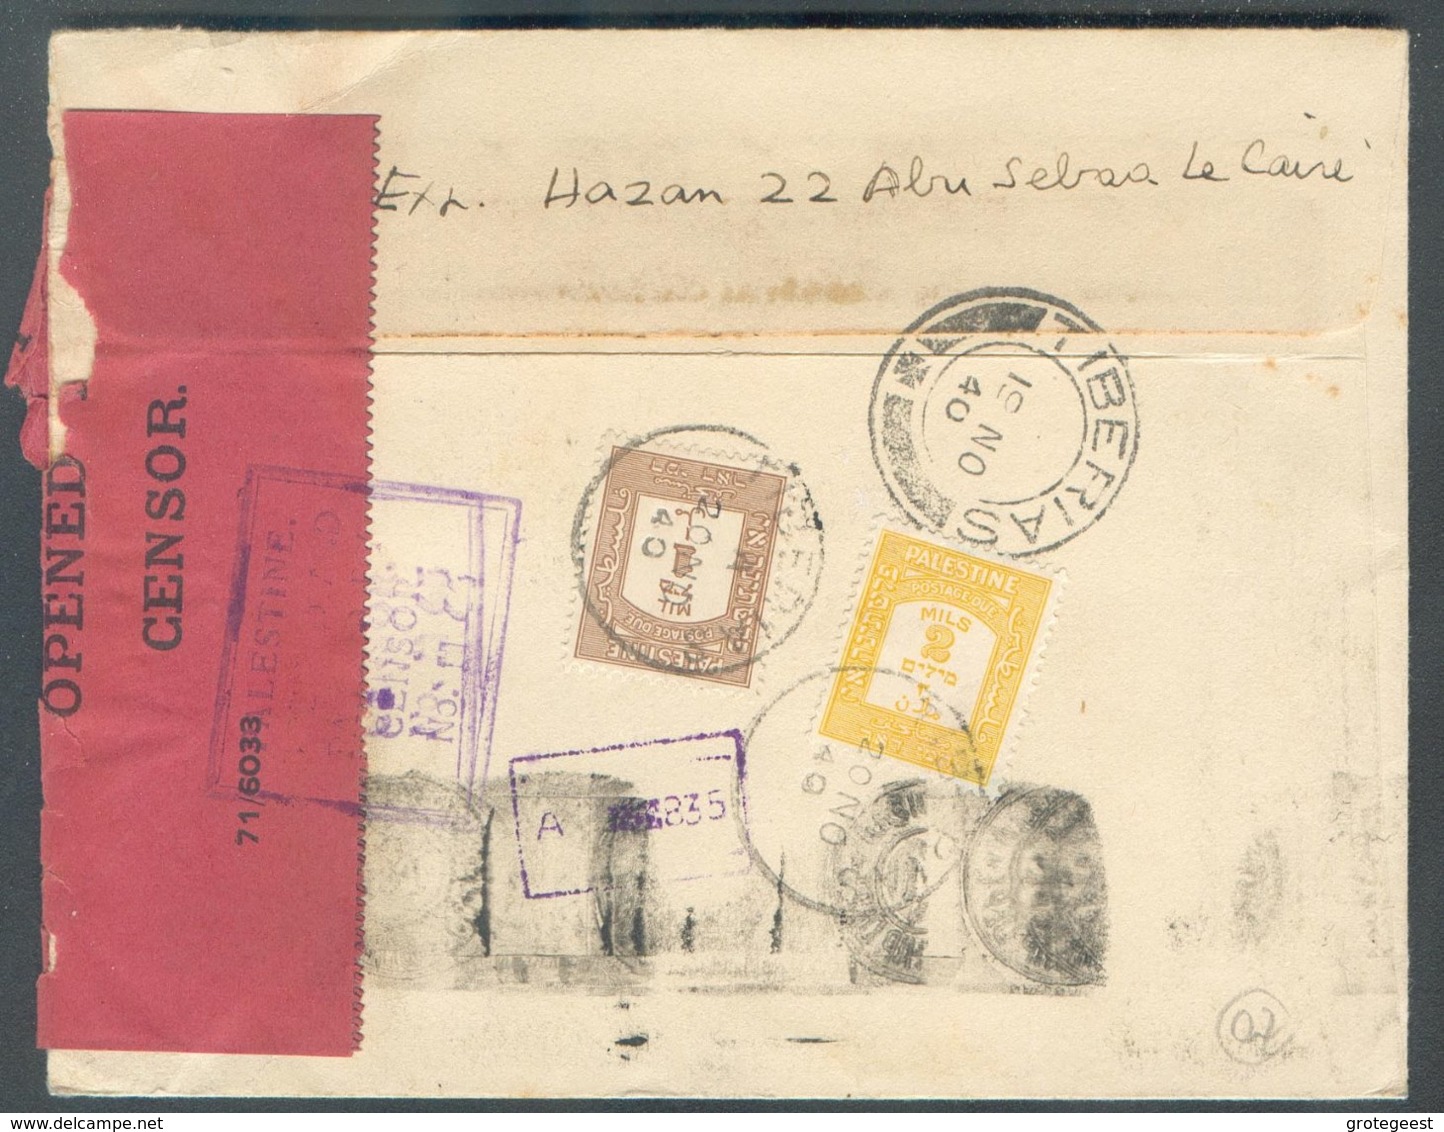 MULTIPLE EGYPTIAN PALESTINIAN CENSOR FAROUK 5 Mill. (block Of 4) Cacnelled CAIRO D.B. On Cover OCT. 1940 Censored To Tib - Covers & Documents